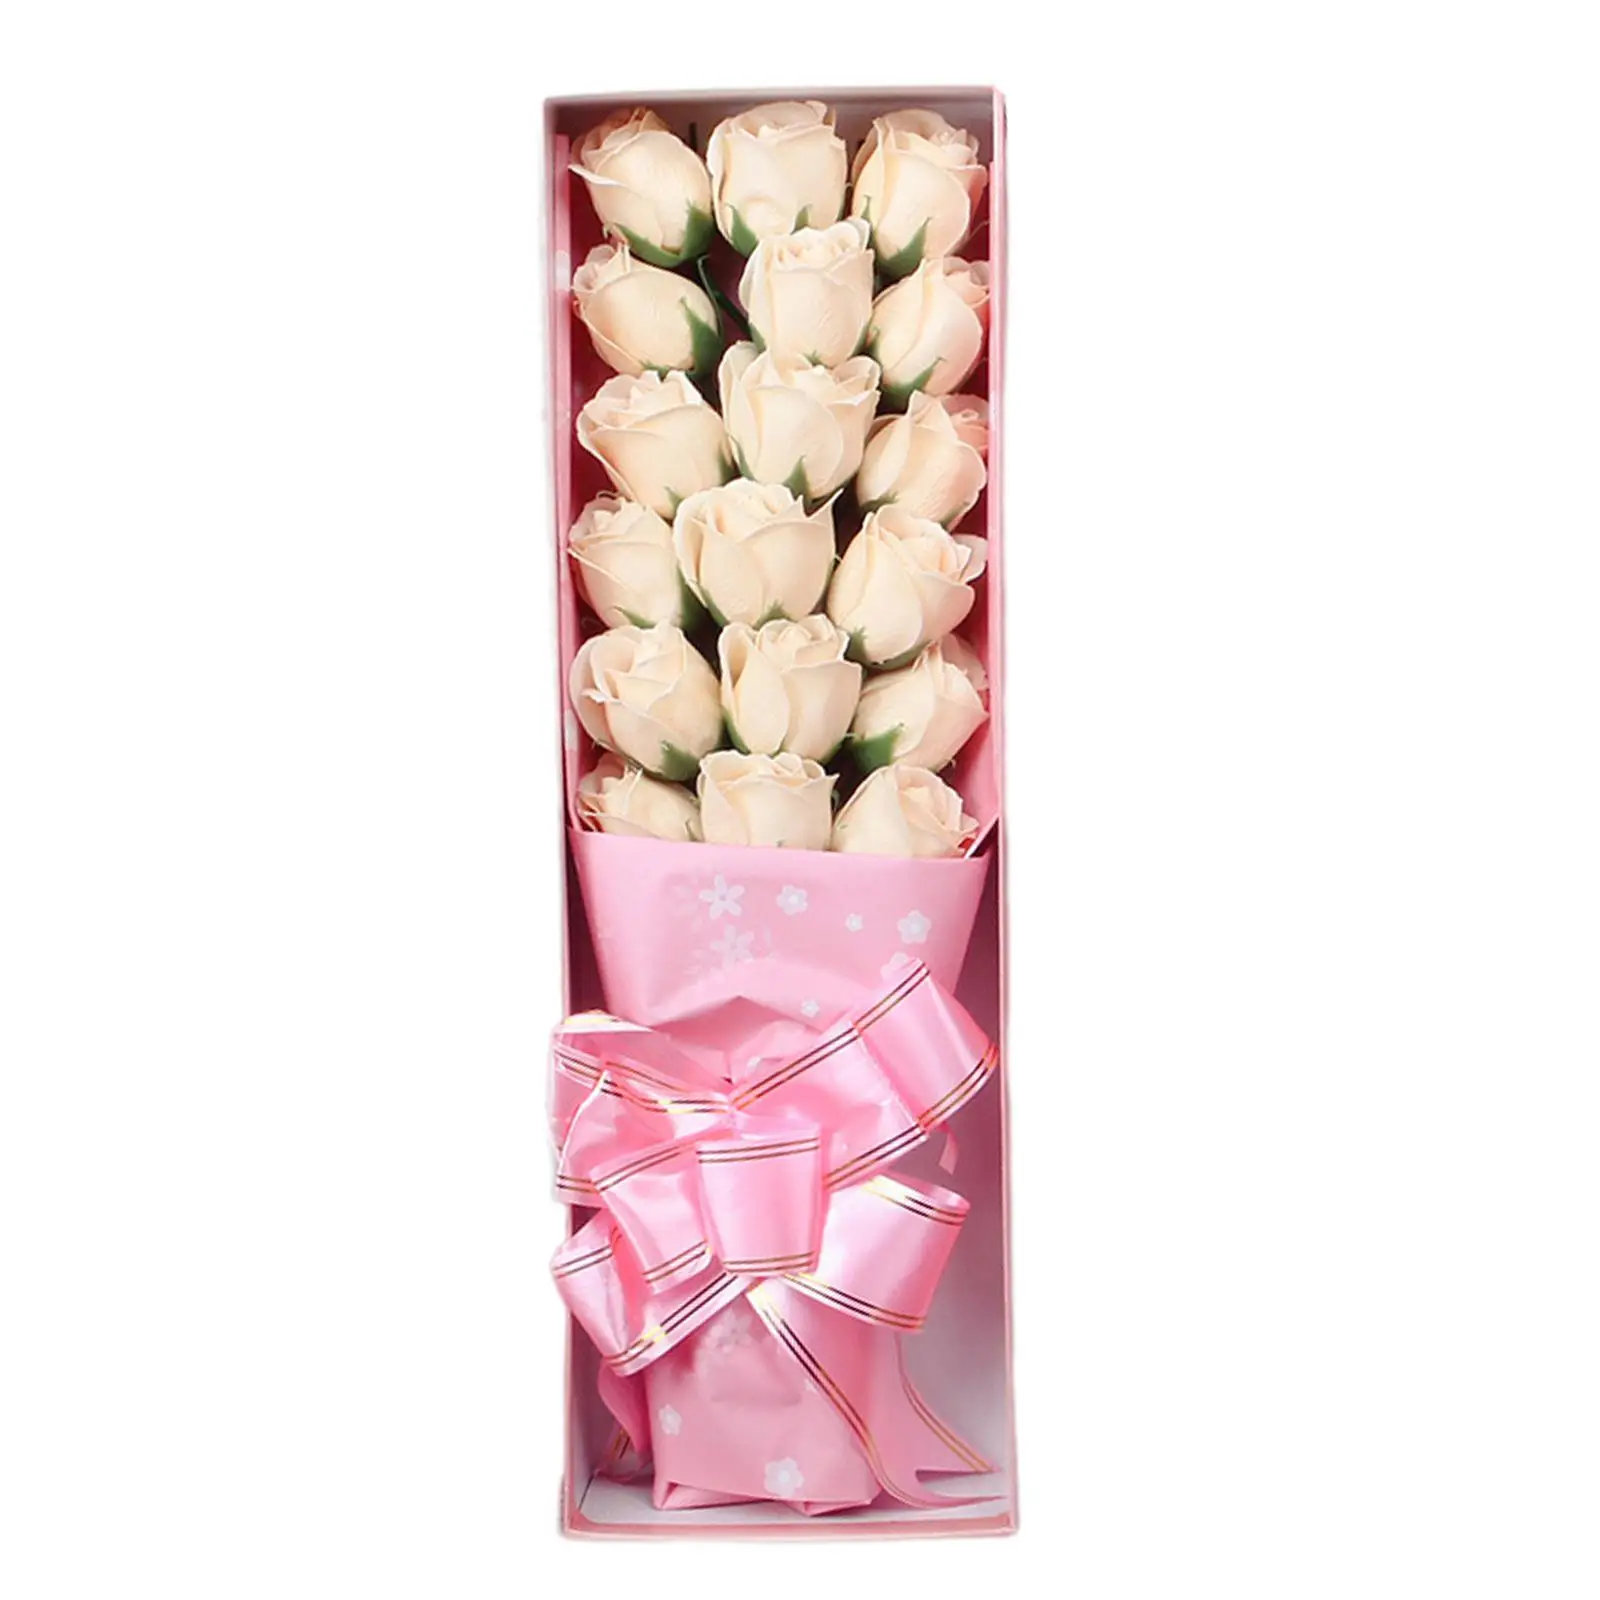 Soap Roses Gift Ideas Ornaments Girls Realistic Women Artificial Flowers for Birthday Wedding Girlfriend Festival Thanksgiving